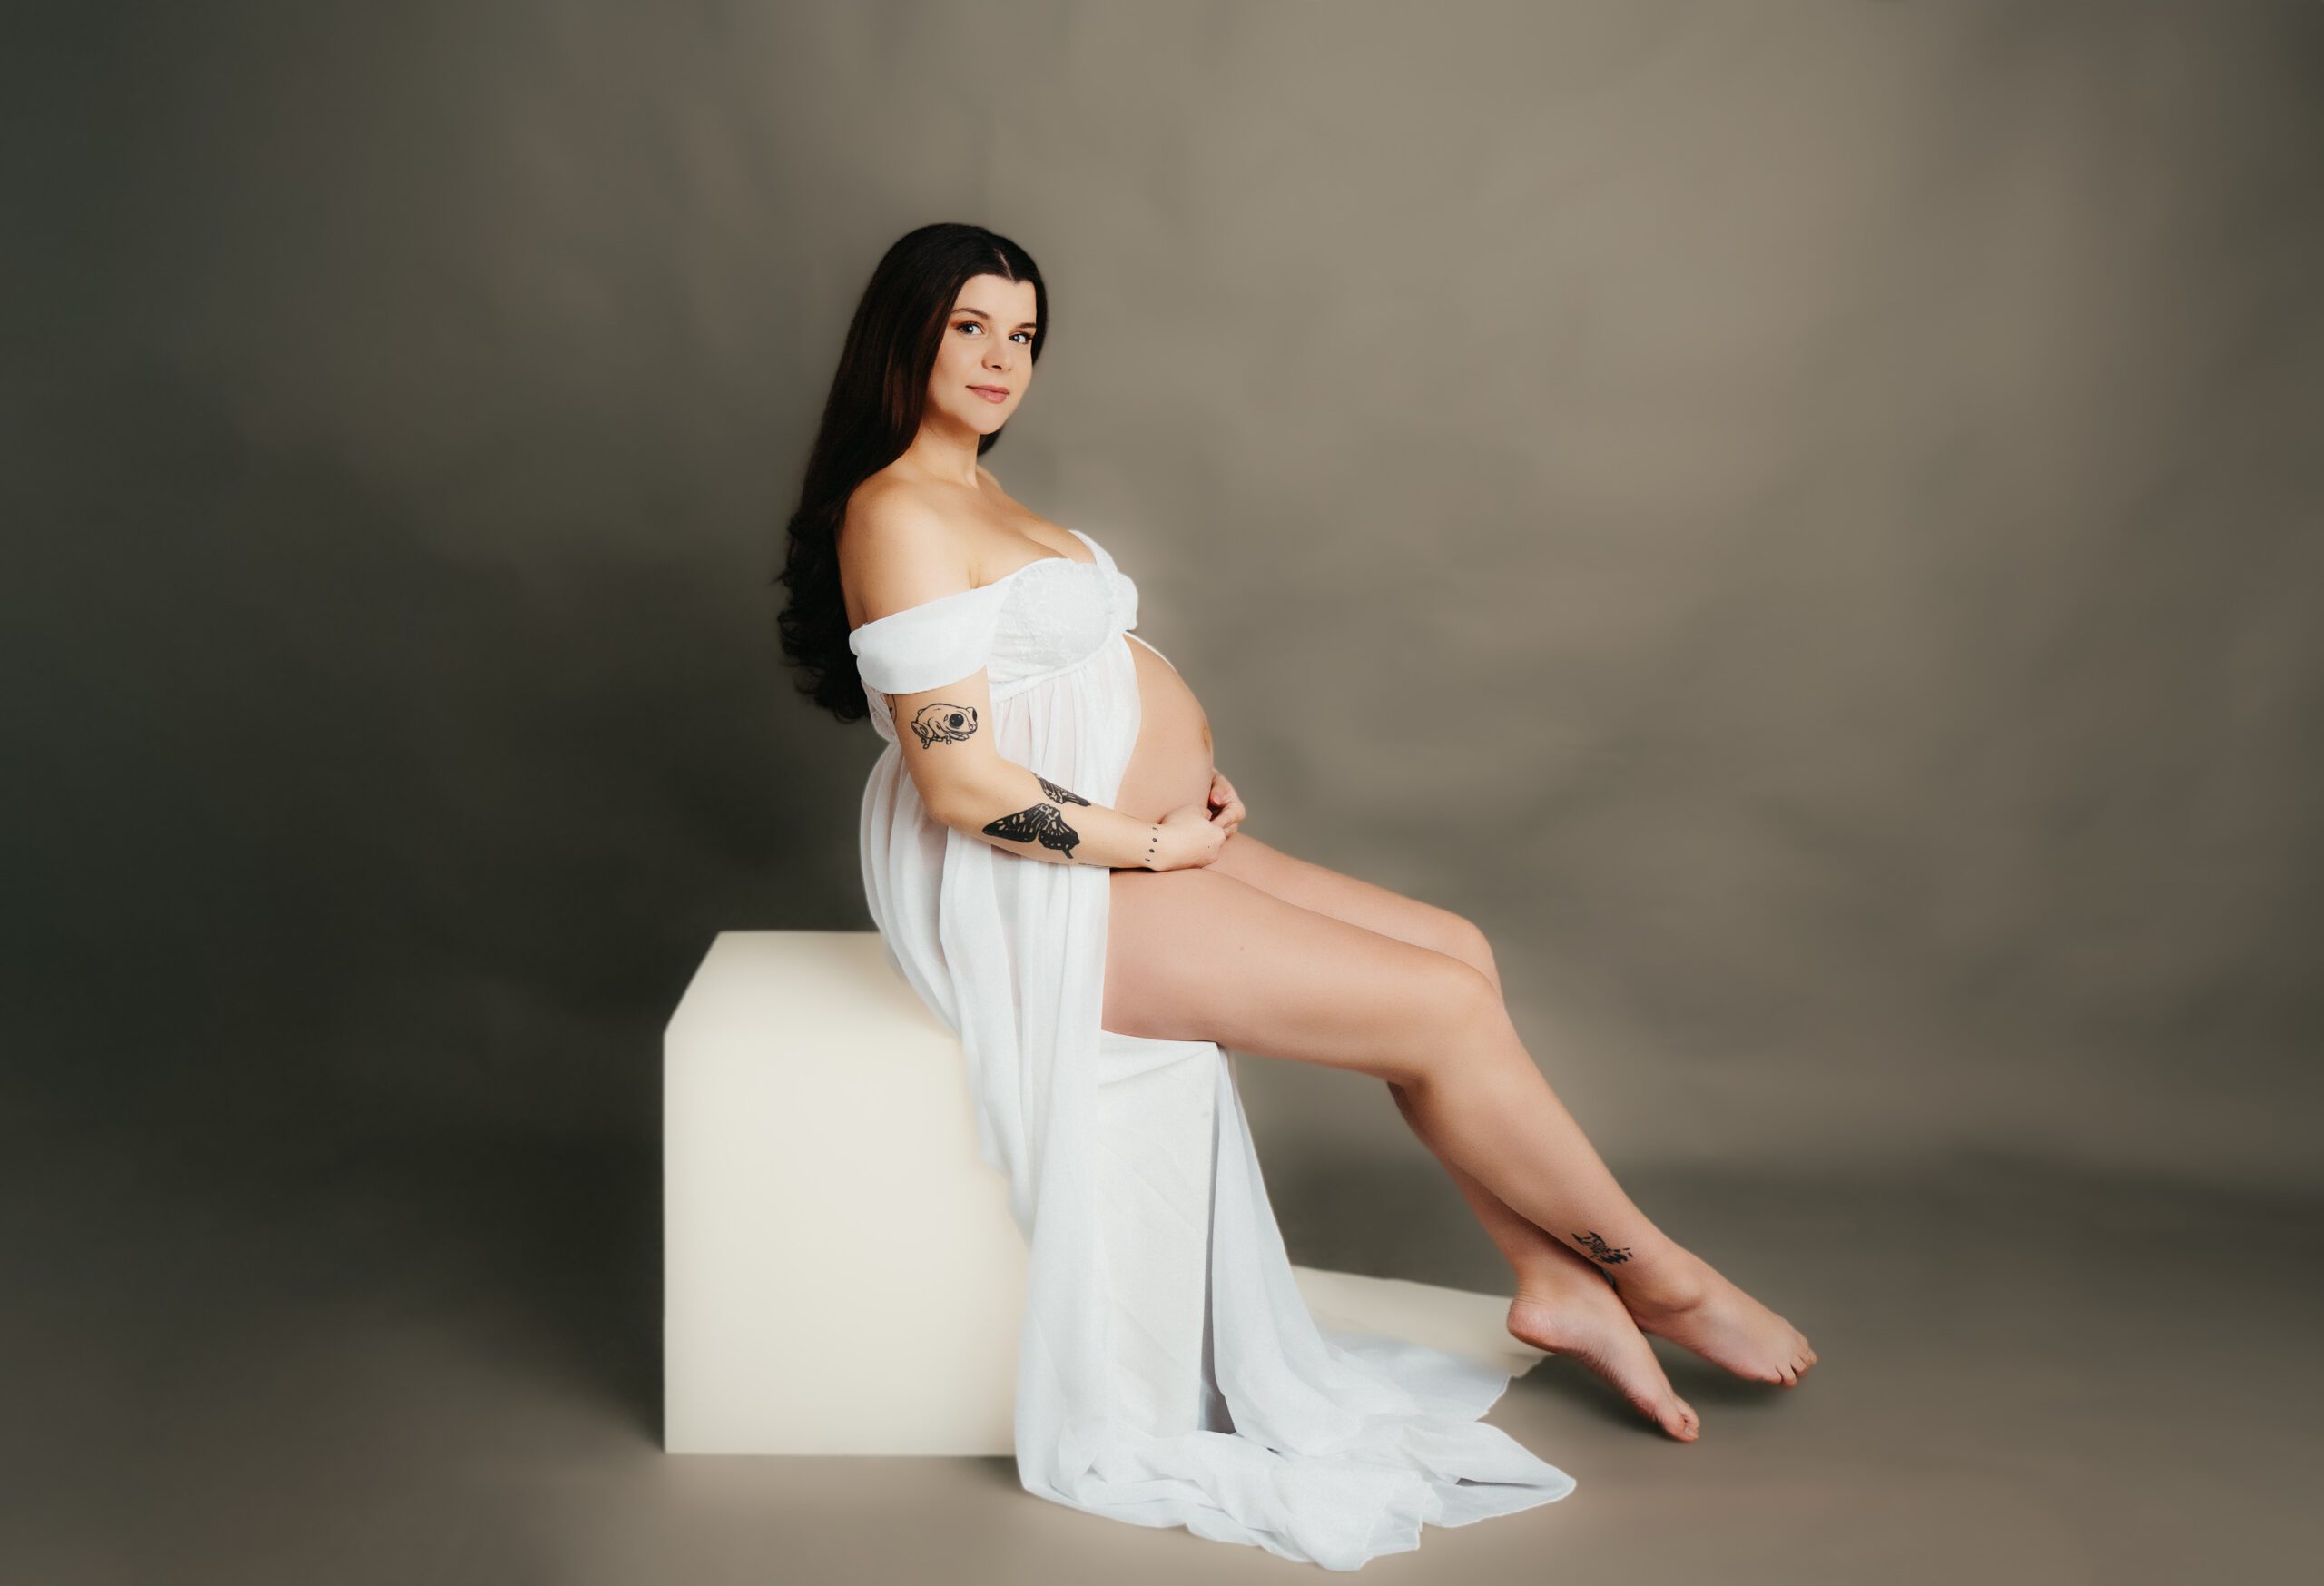 Expectant woman with a vintage flair, gazing confidently into the camera against a warm copper background, capturing the timeless beauty of maternity in a classic setting